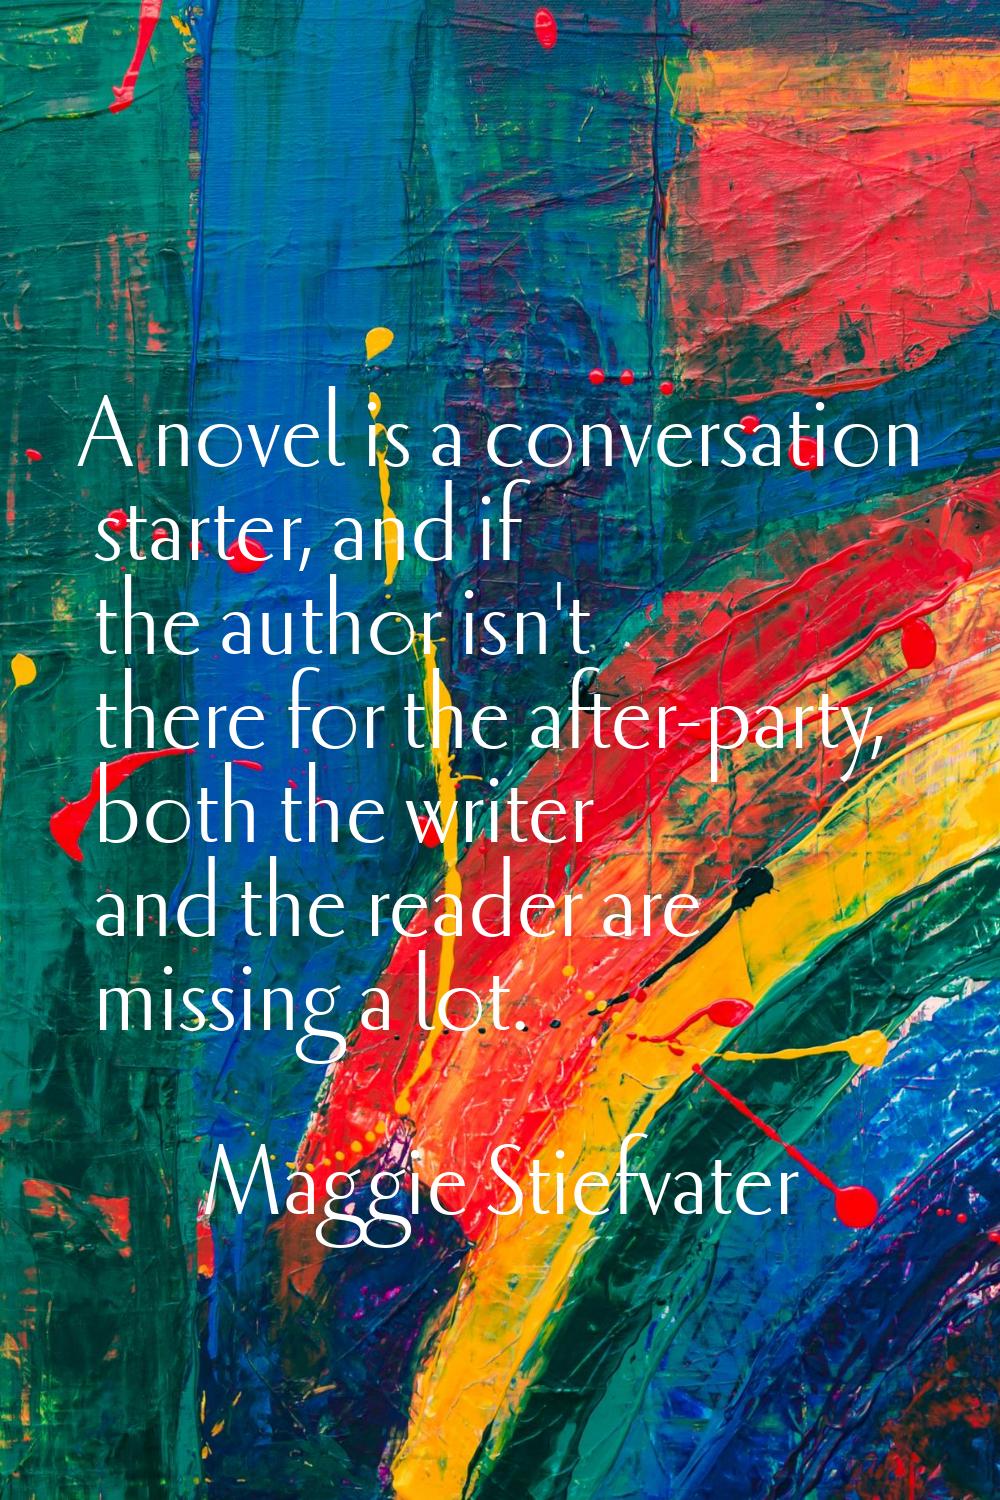 A novel is a conversation starter, and if the author isn't there for the after-party, both the writ